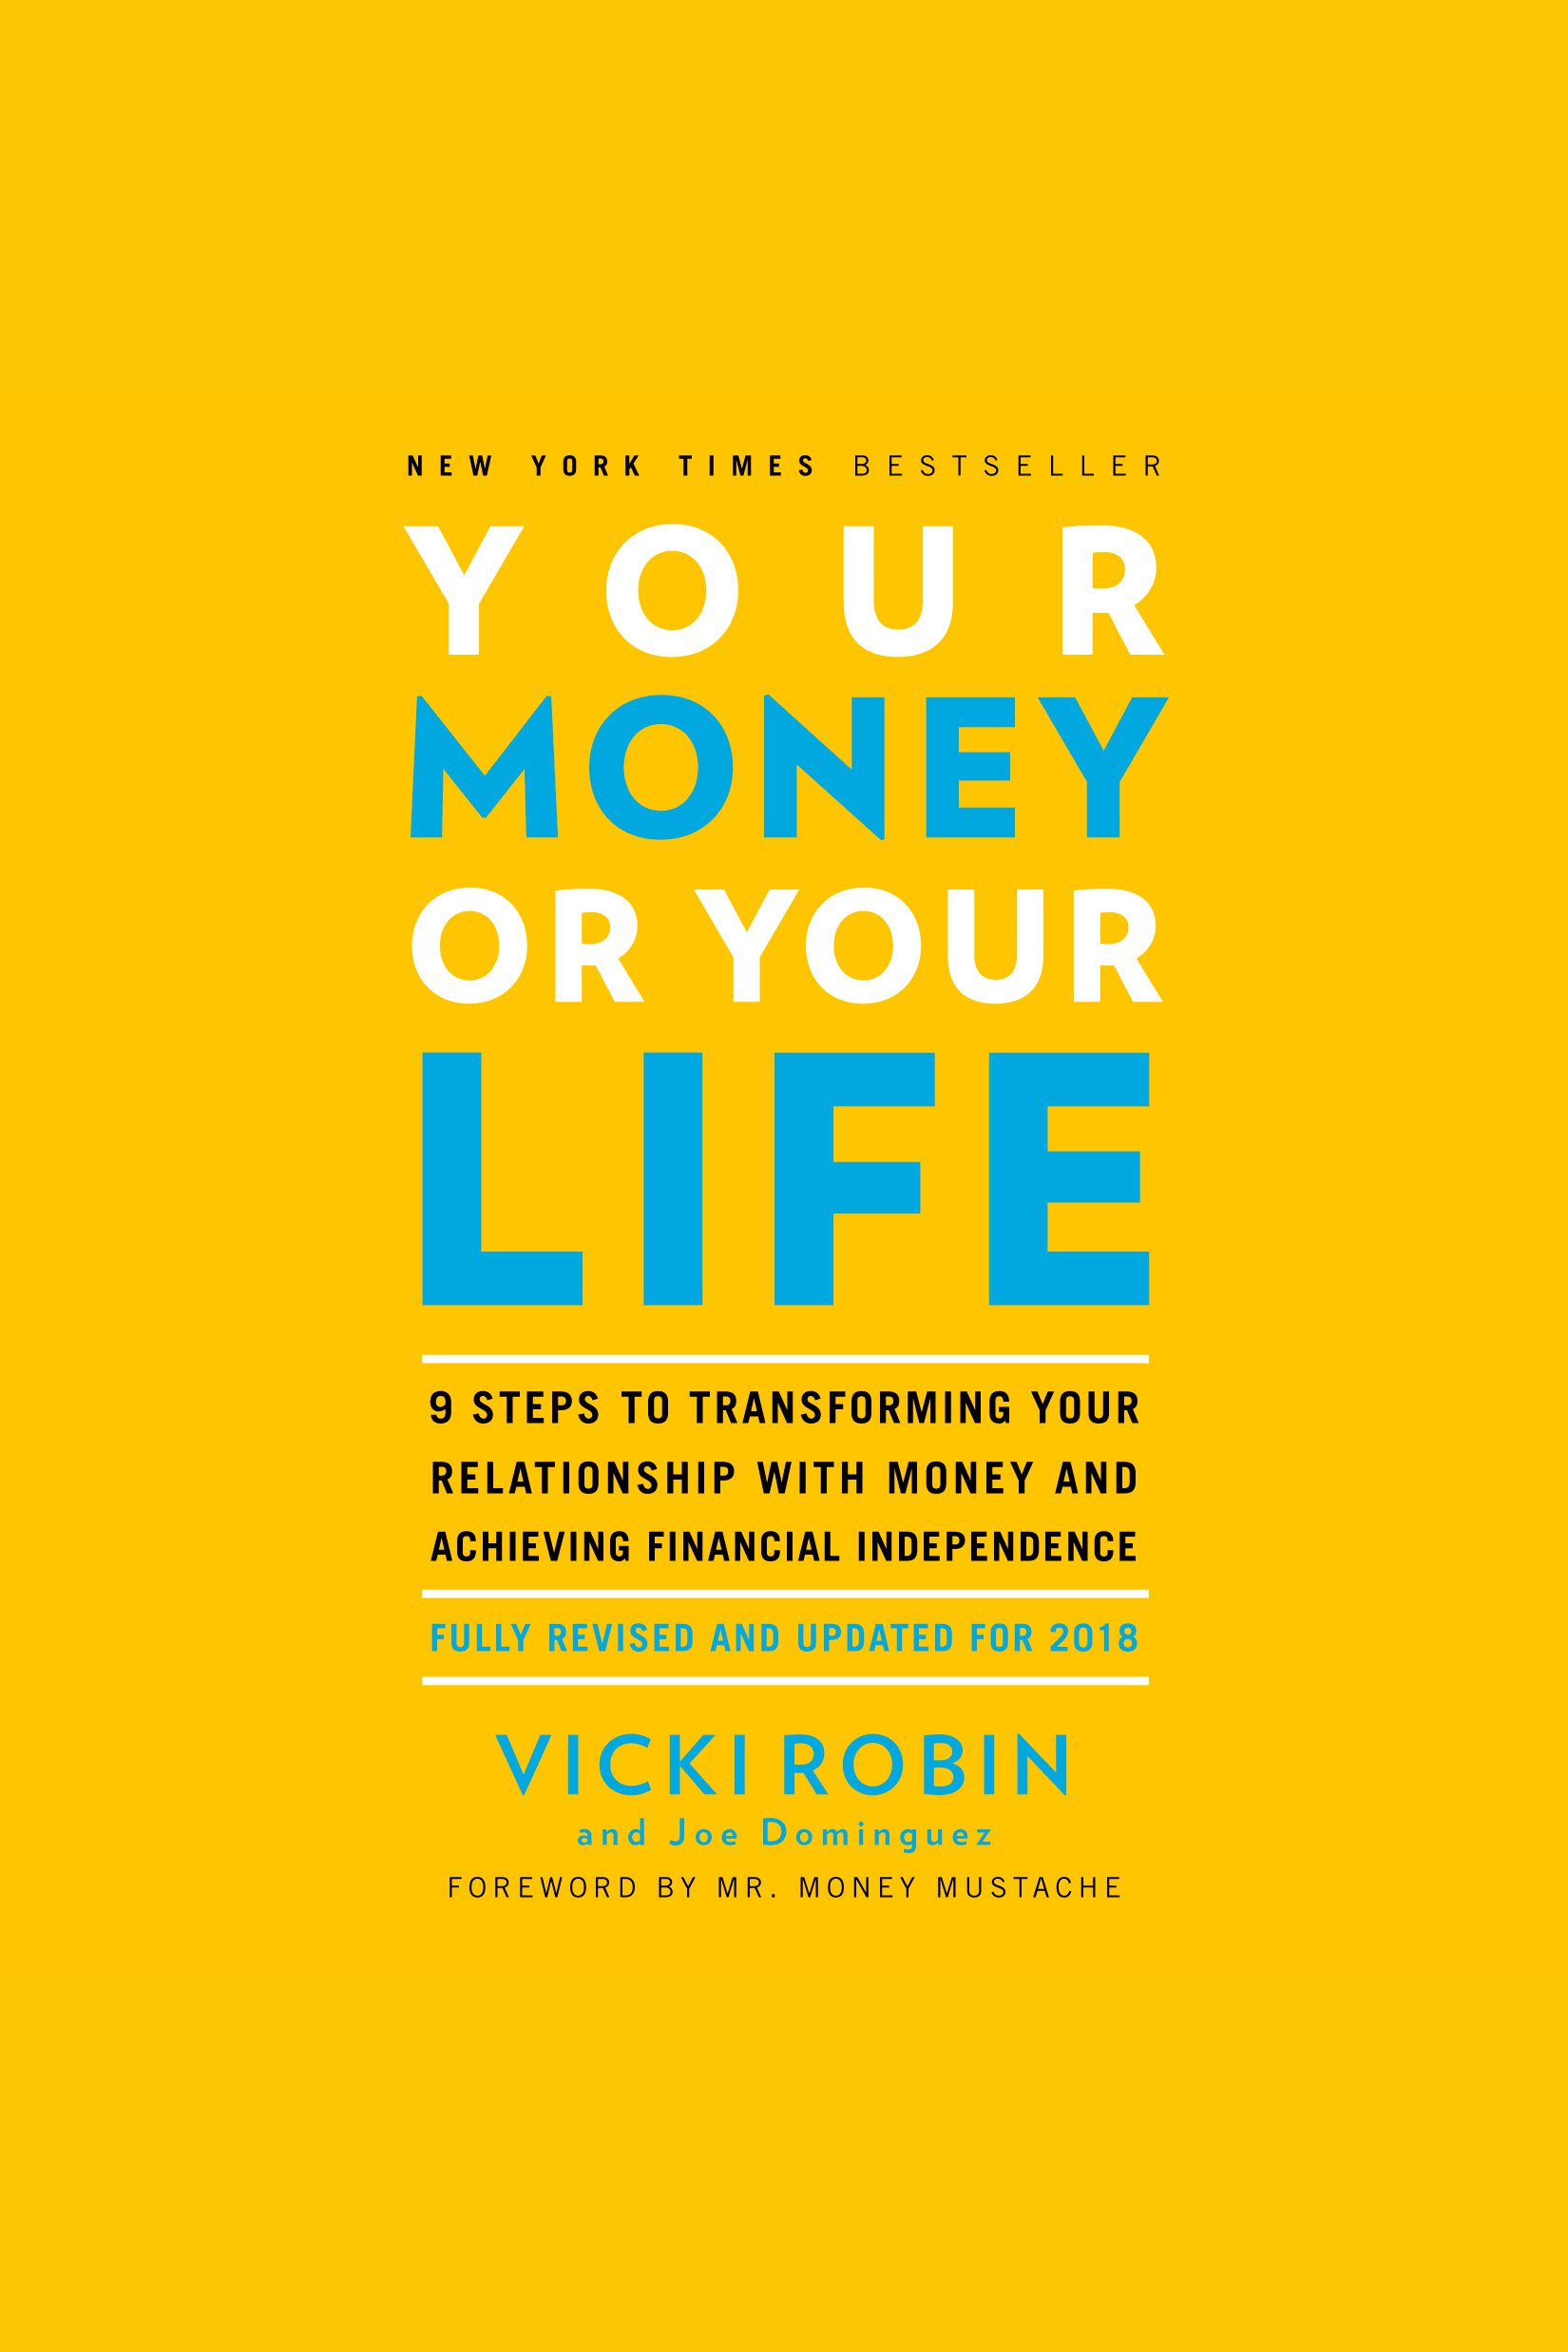 Your Money or Your Life 9 Steps to Transforming Your Relationship with Money and Achieving Financial Independence: Fully Revised and Updated for 2018 cover image